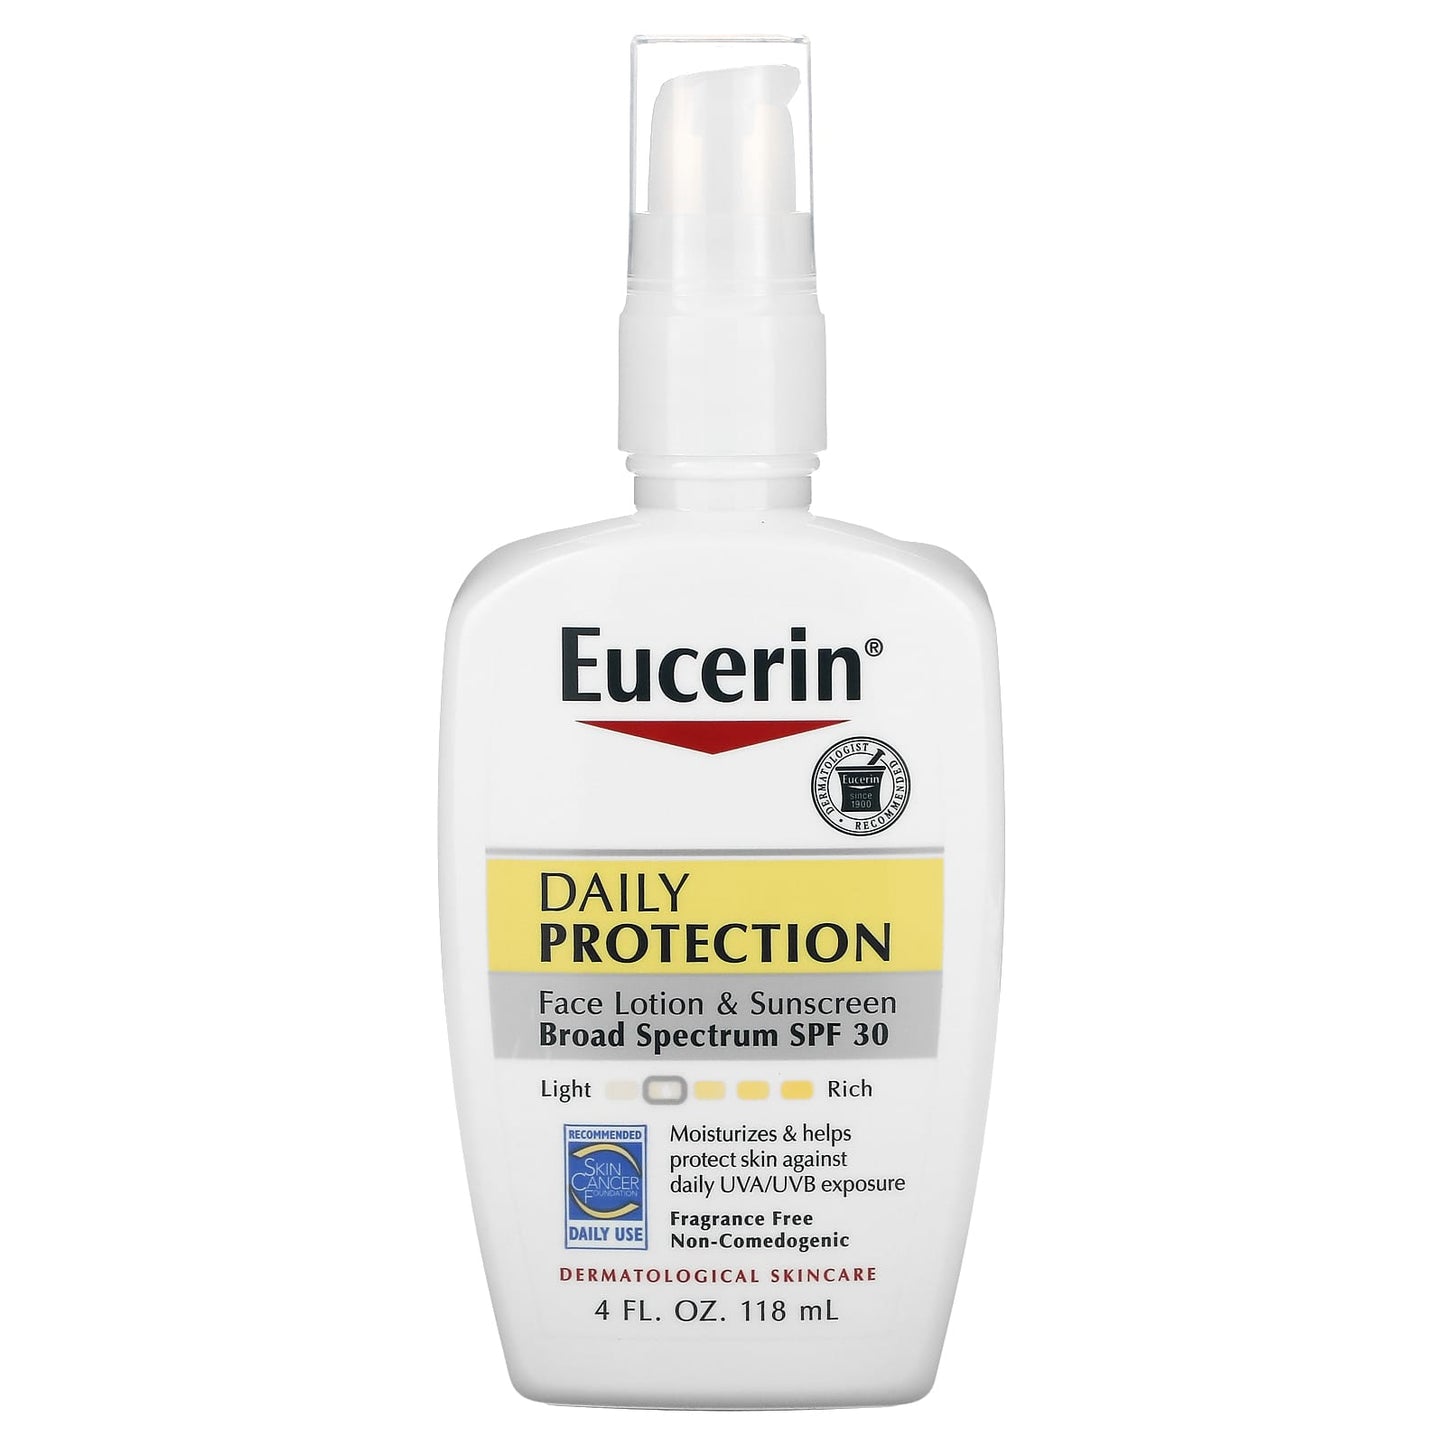 Eucerin-Daily Protection Face Lotion & Sunscreen-SPF 30-Fragrance Free-4 fl oz (118 ml)